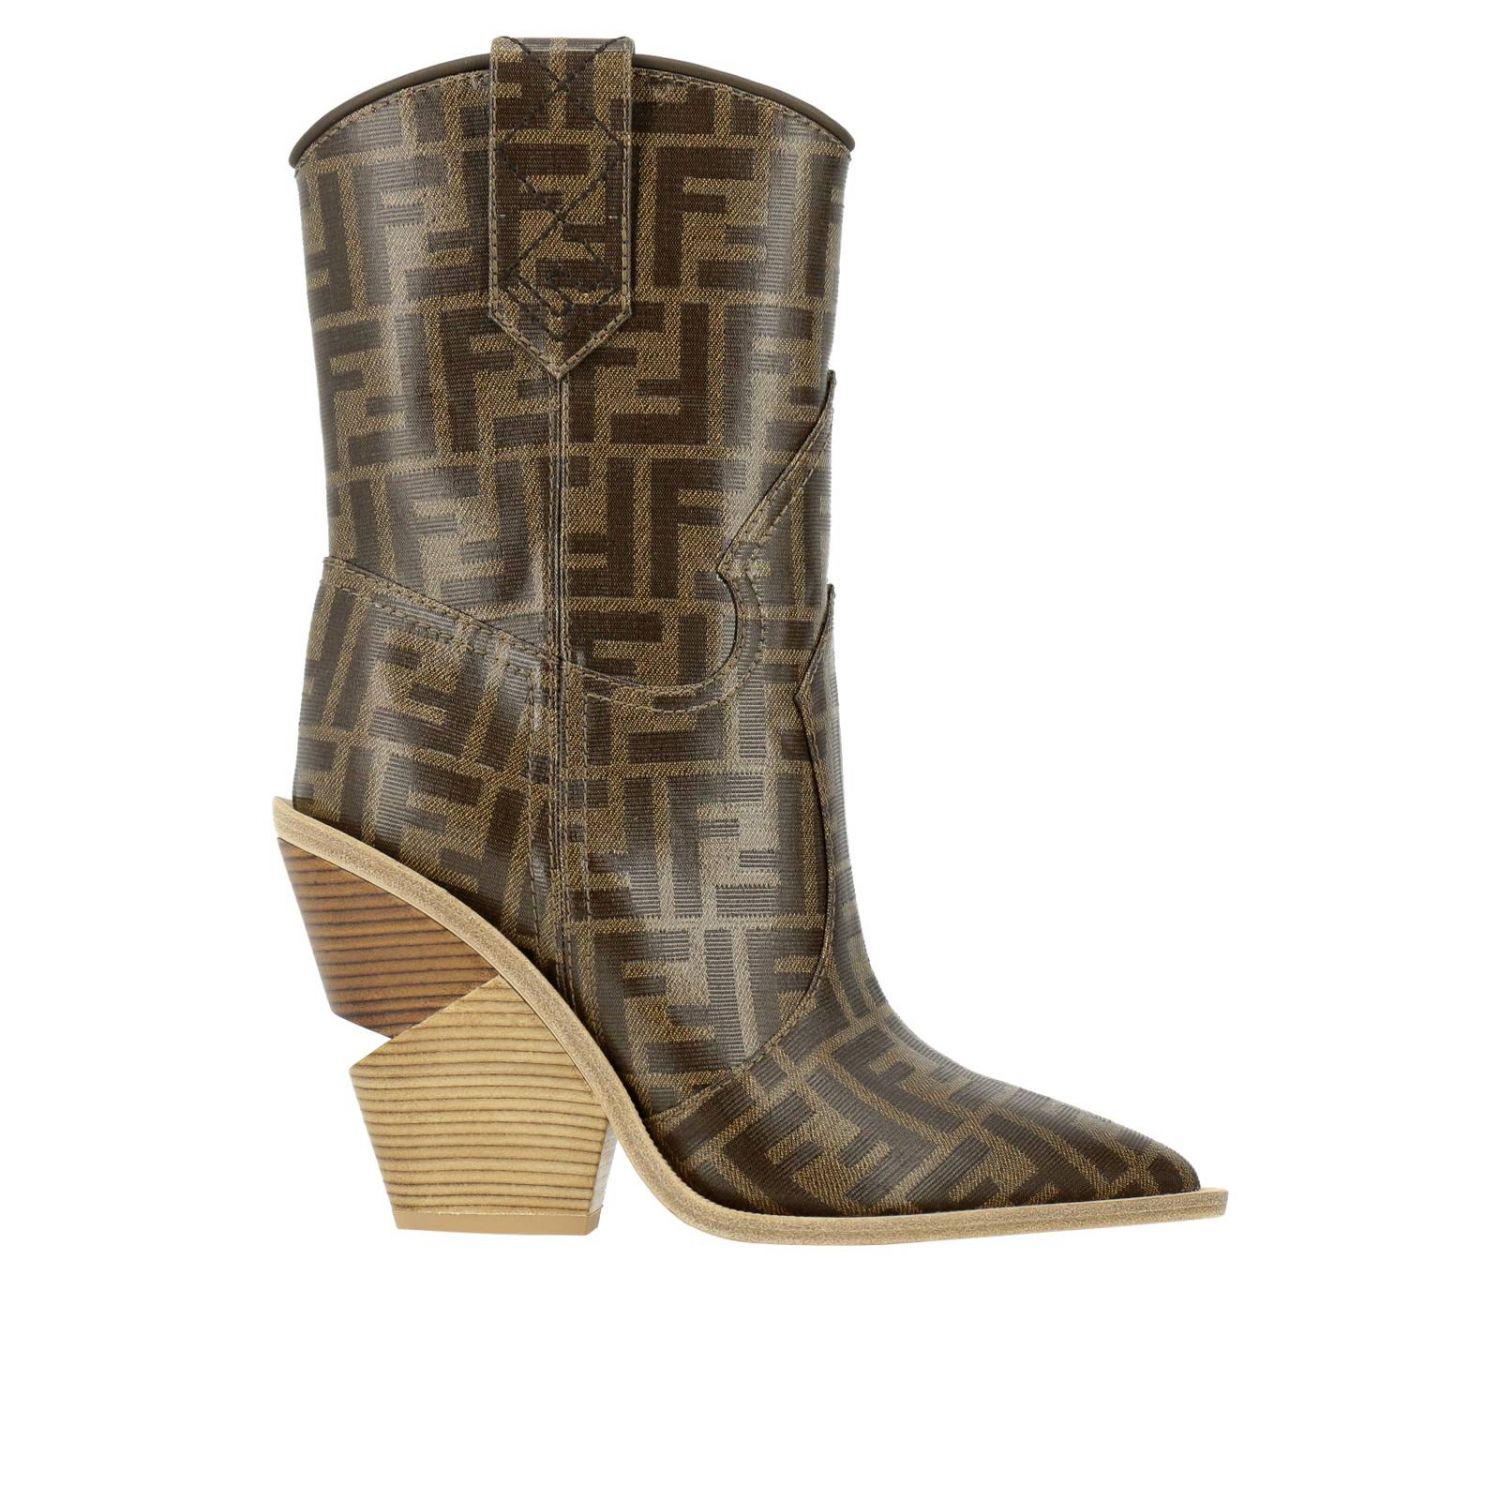 Fendi Printed Cowboy Boots in Brown | Lyst